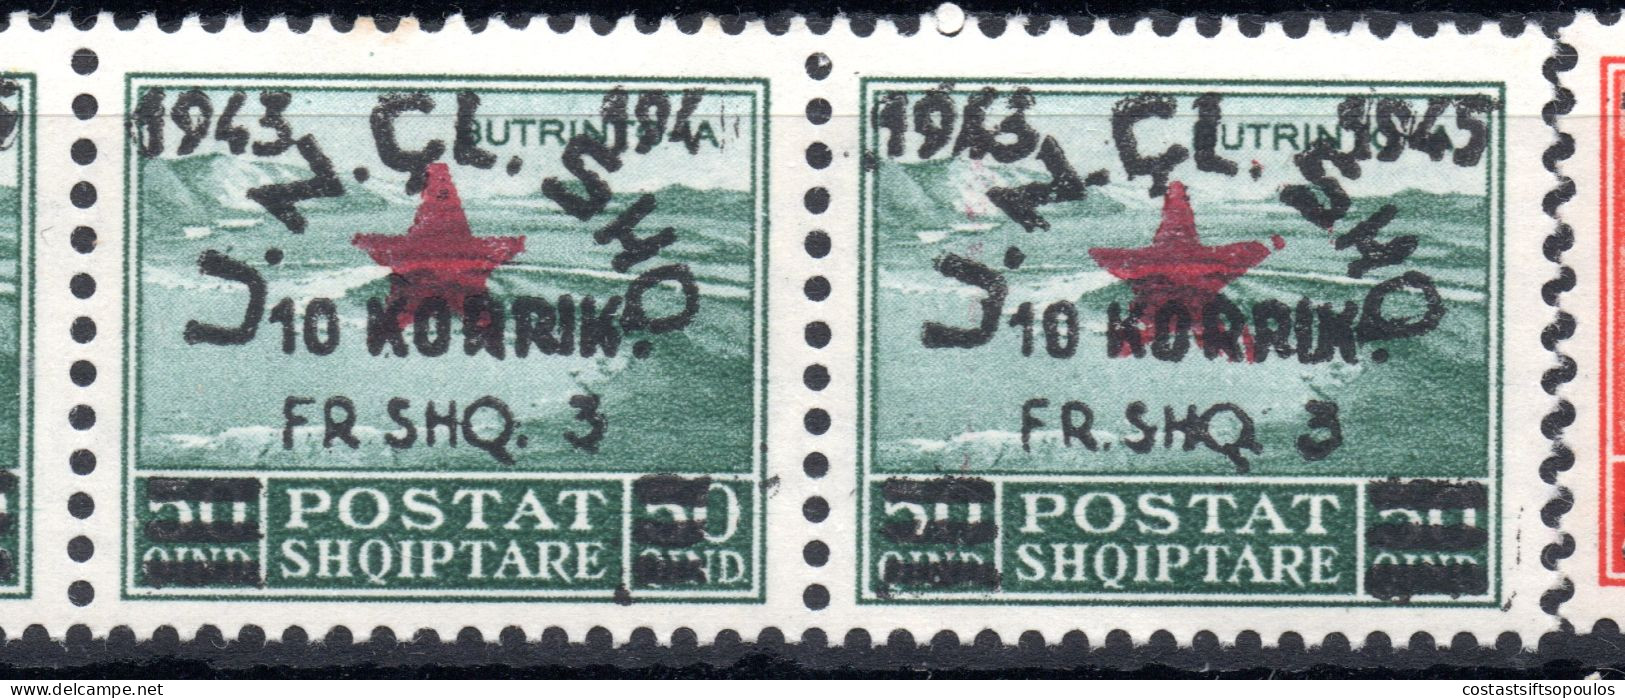 2936. ALBANIA 1945 ALBANIAN ARMY, MICH.368-374 MNH STRIPS OF 4. 1 X 373 194 INSTEAD OF 1945,SC. 354-360 - Albanien